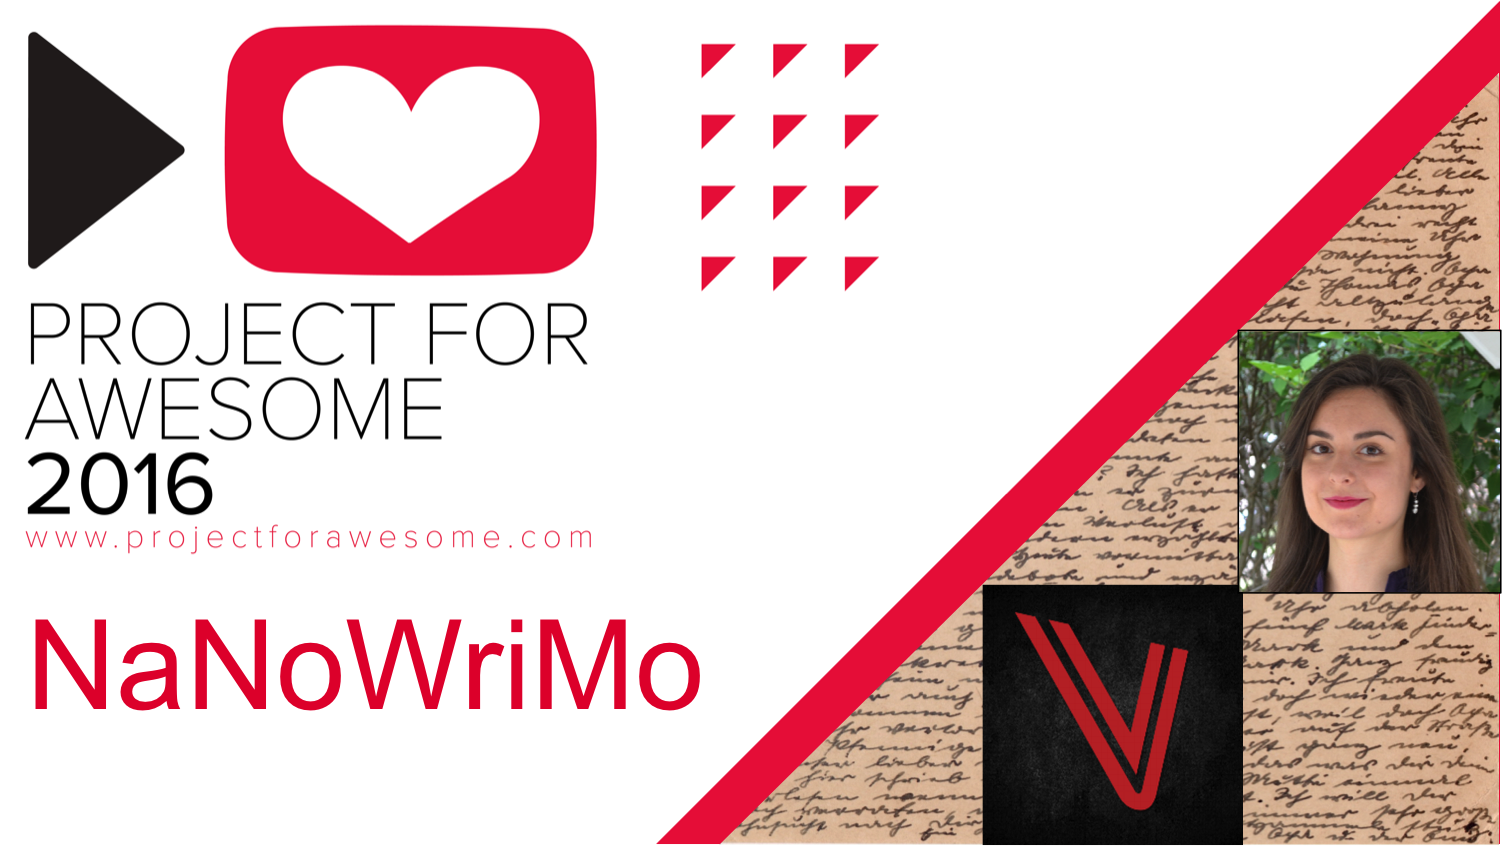 project-for-awesome-2016-nanowrimo1